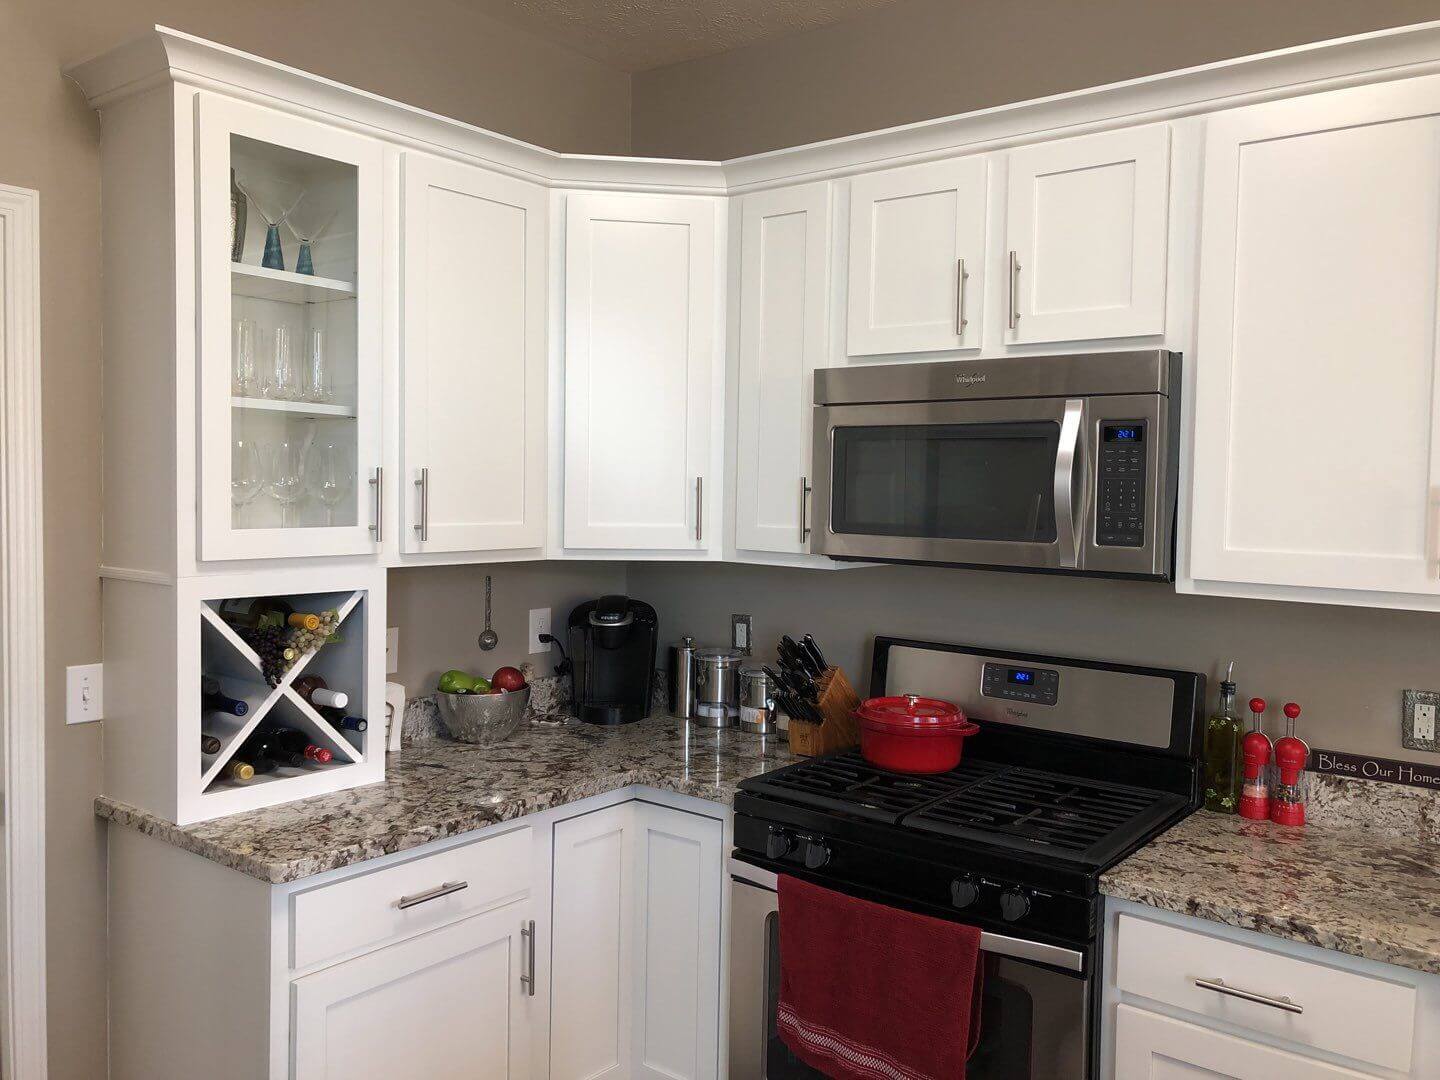 I Paint My Kitchen Cabinets, What Color Paint Goes With Taupe Kitchen Cabinets